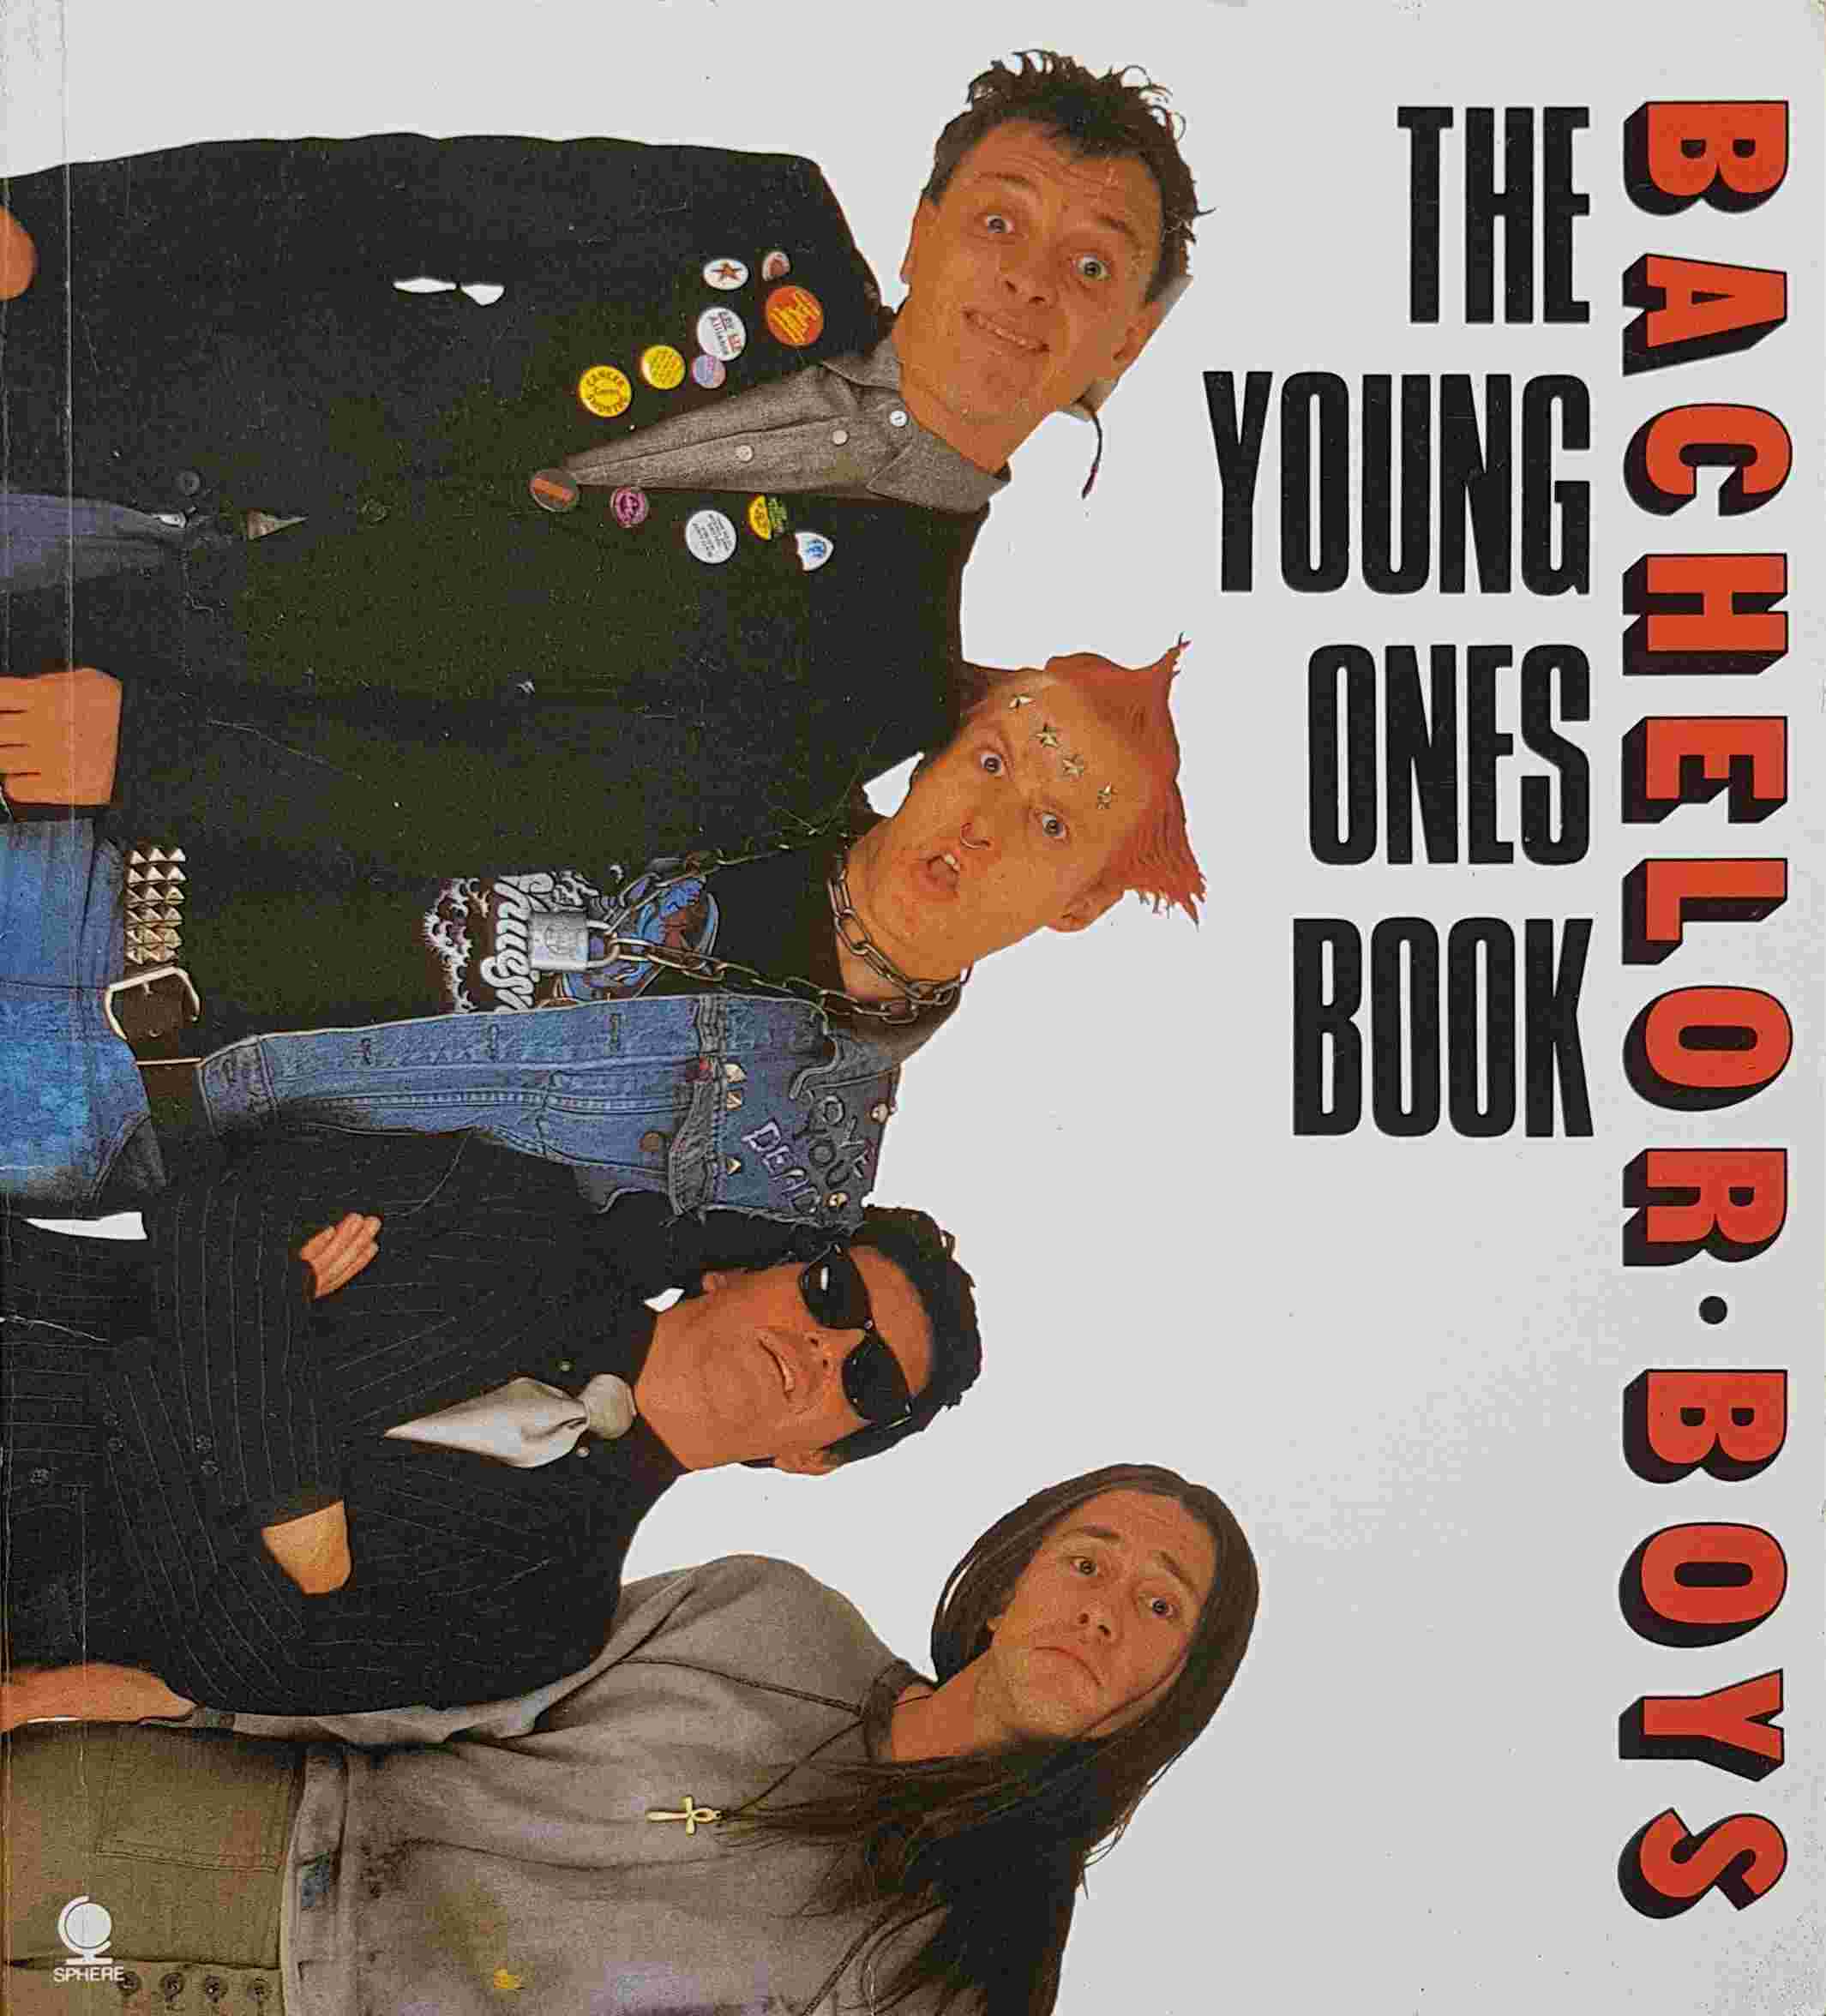 Picture of 0-7211-5765-7 The young ones - Bachelor boys by artist Ben Elton / Rik Mayall from the BBC books - Records and Tapes library